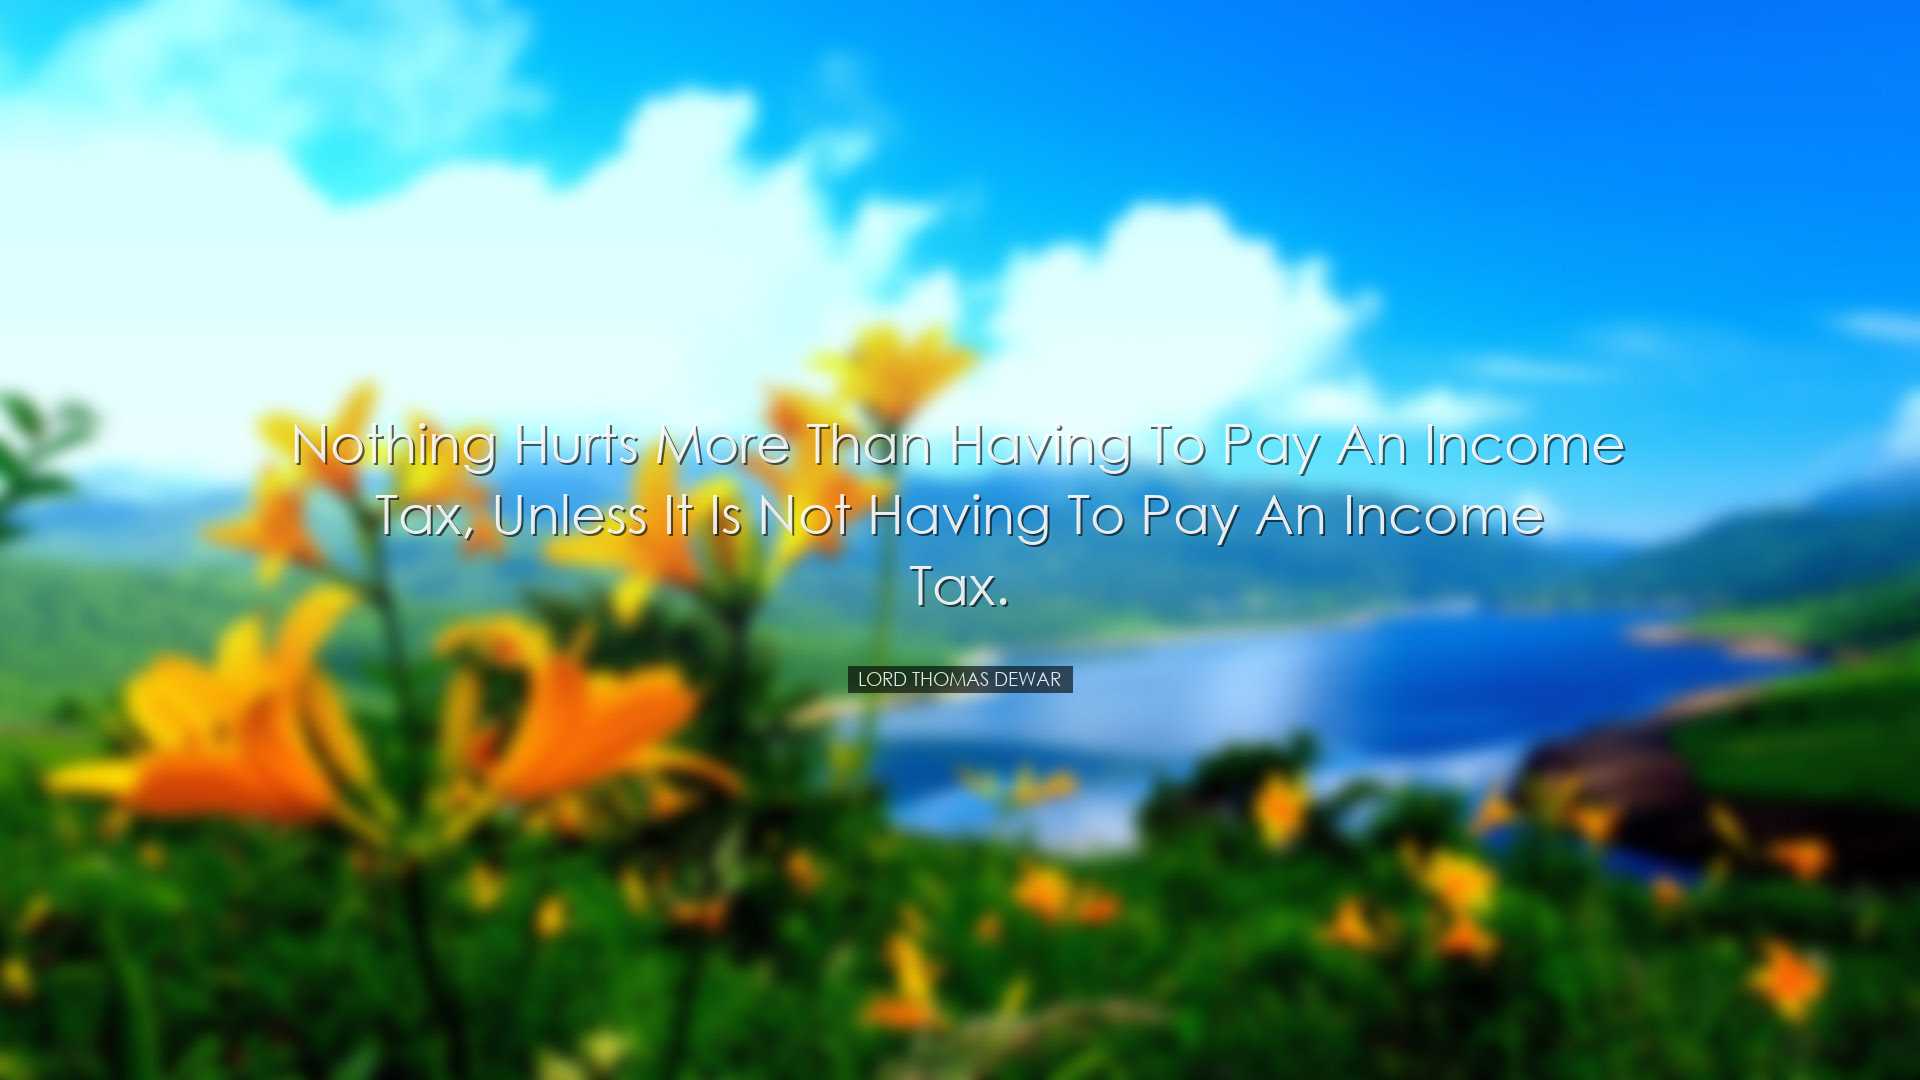 Nothing hurts more than having to pay an income tax, unless it is